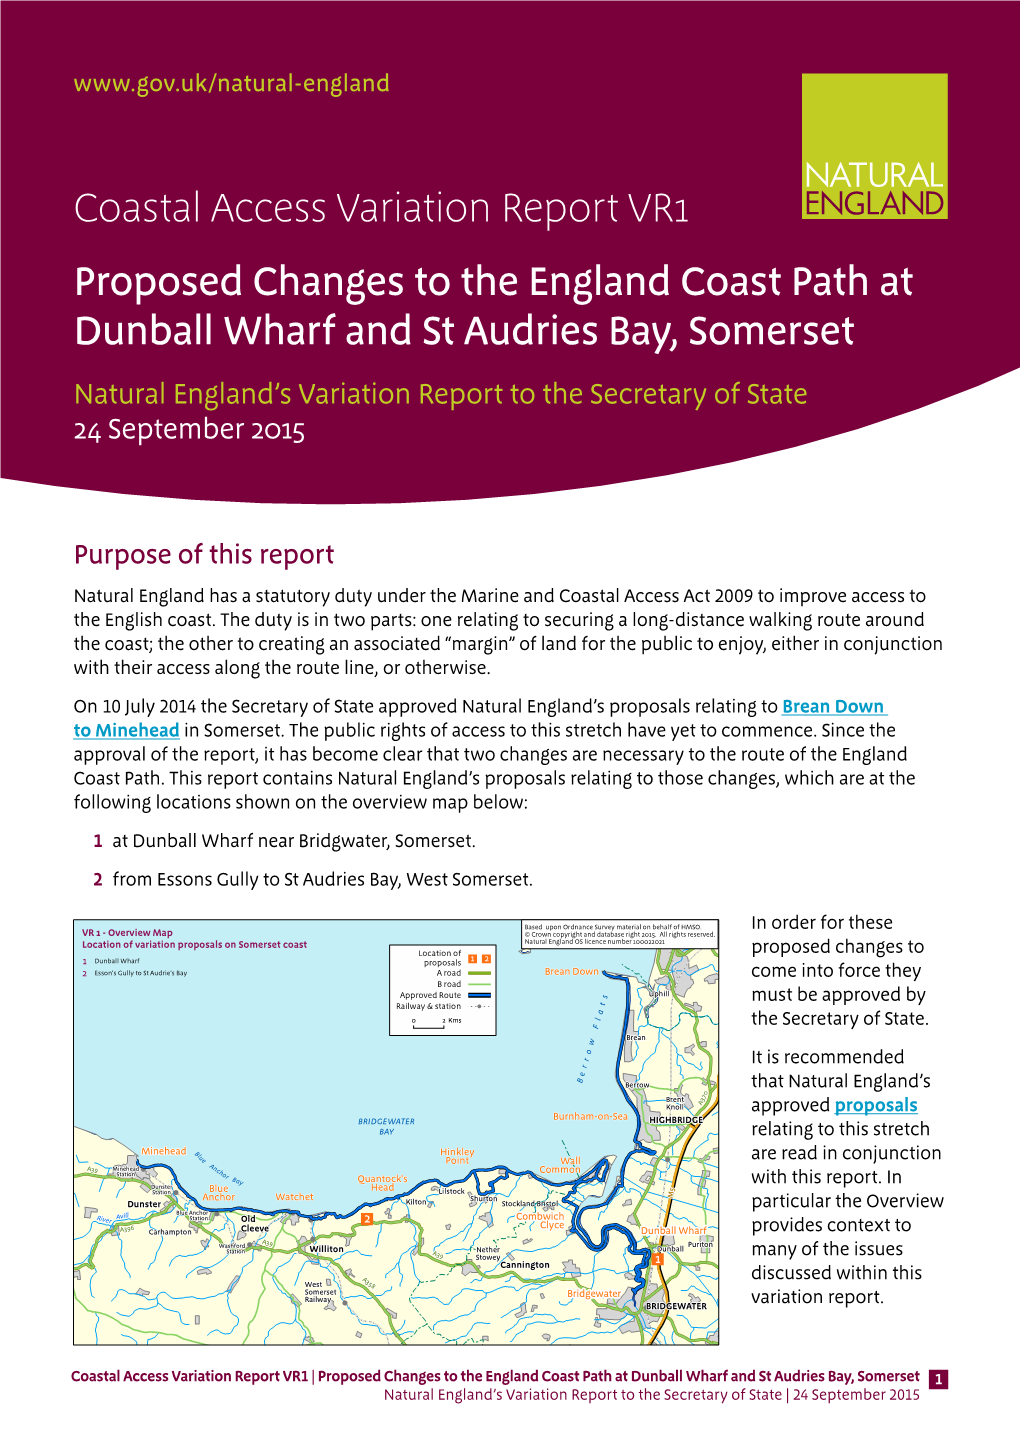 Coastal Access Variation Report VR1 Proposed Changes to the England Coast Path at Dunball Wharf and St Audries Bay, Somerset